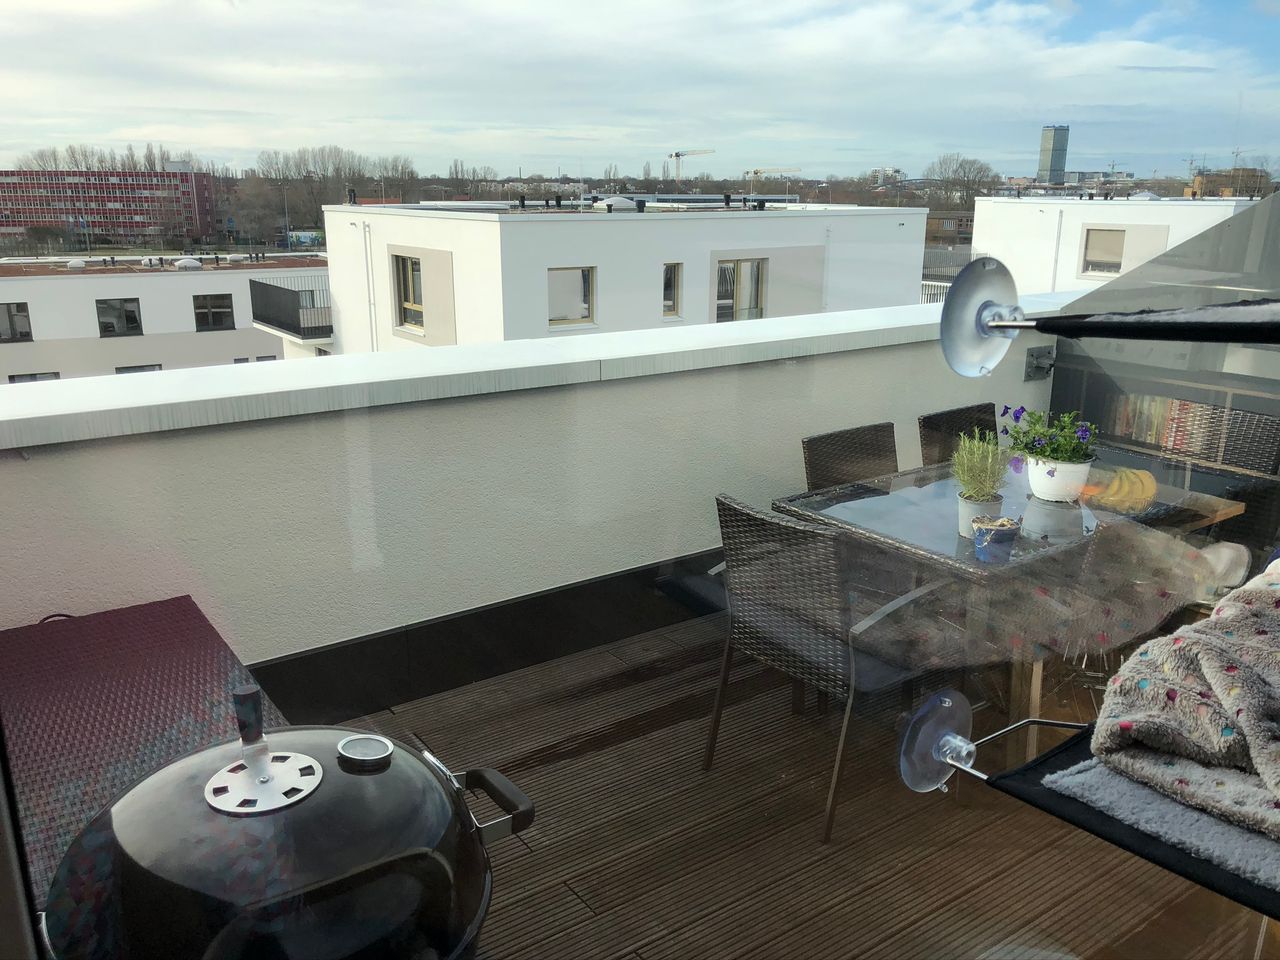 3-room new-build maisonette with 2 terraces (incl. roof terrace) in Lichtenberg